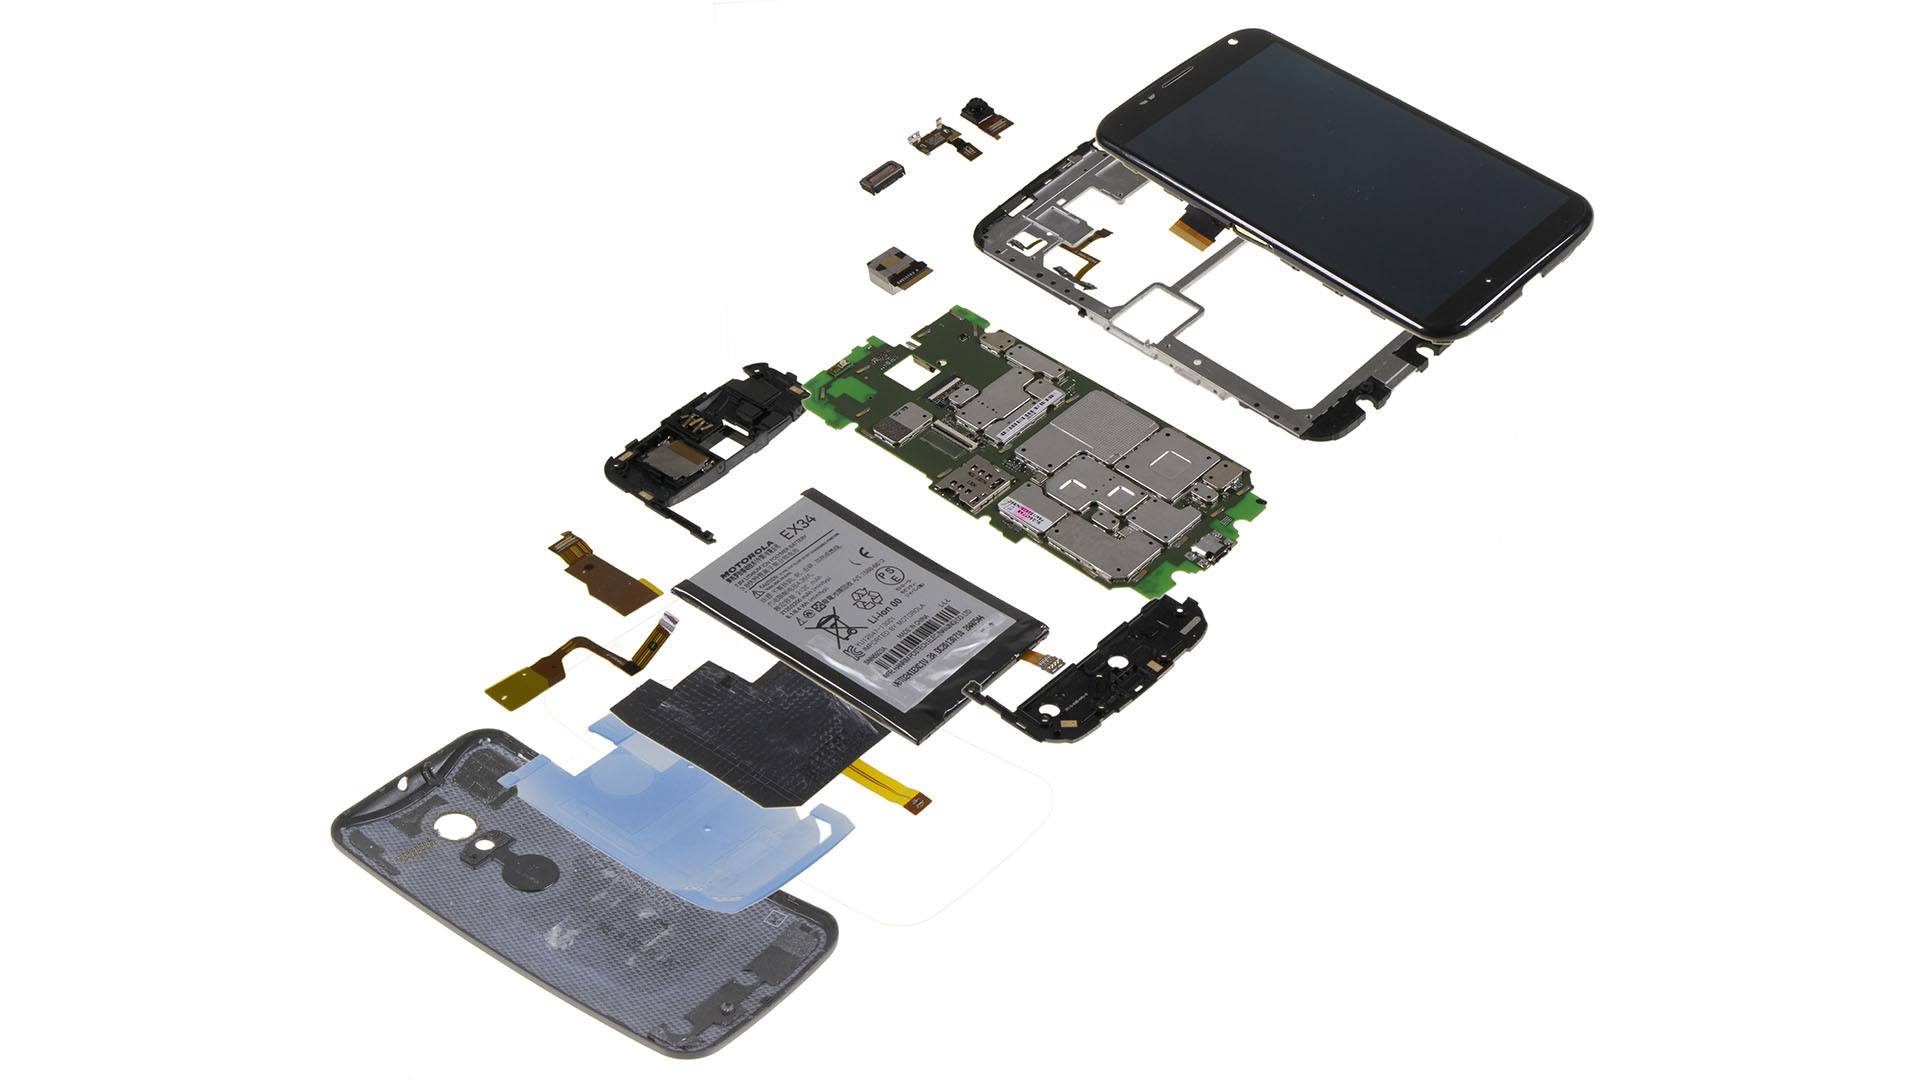 What's Inside My Smartphone: Guide on smartphone components!